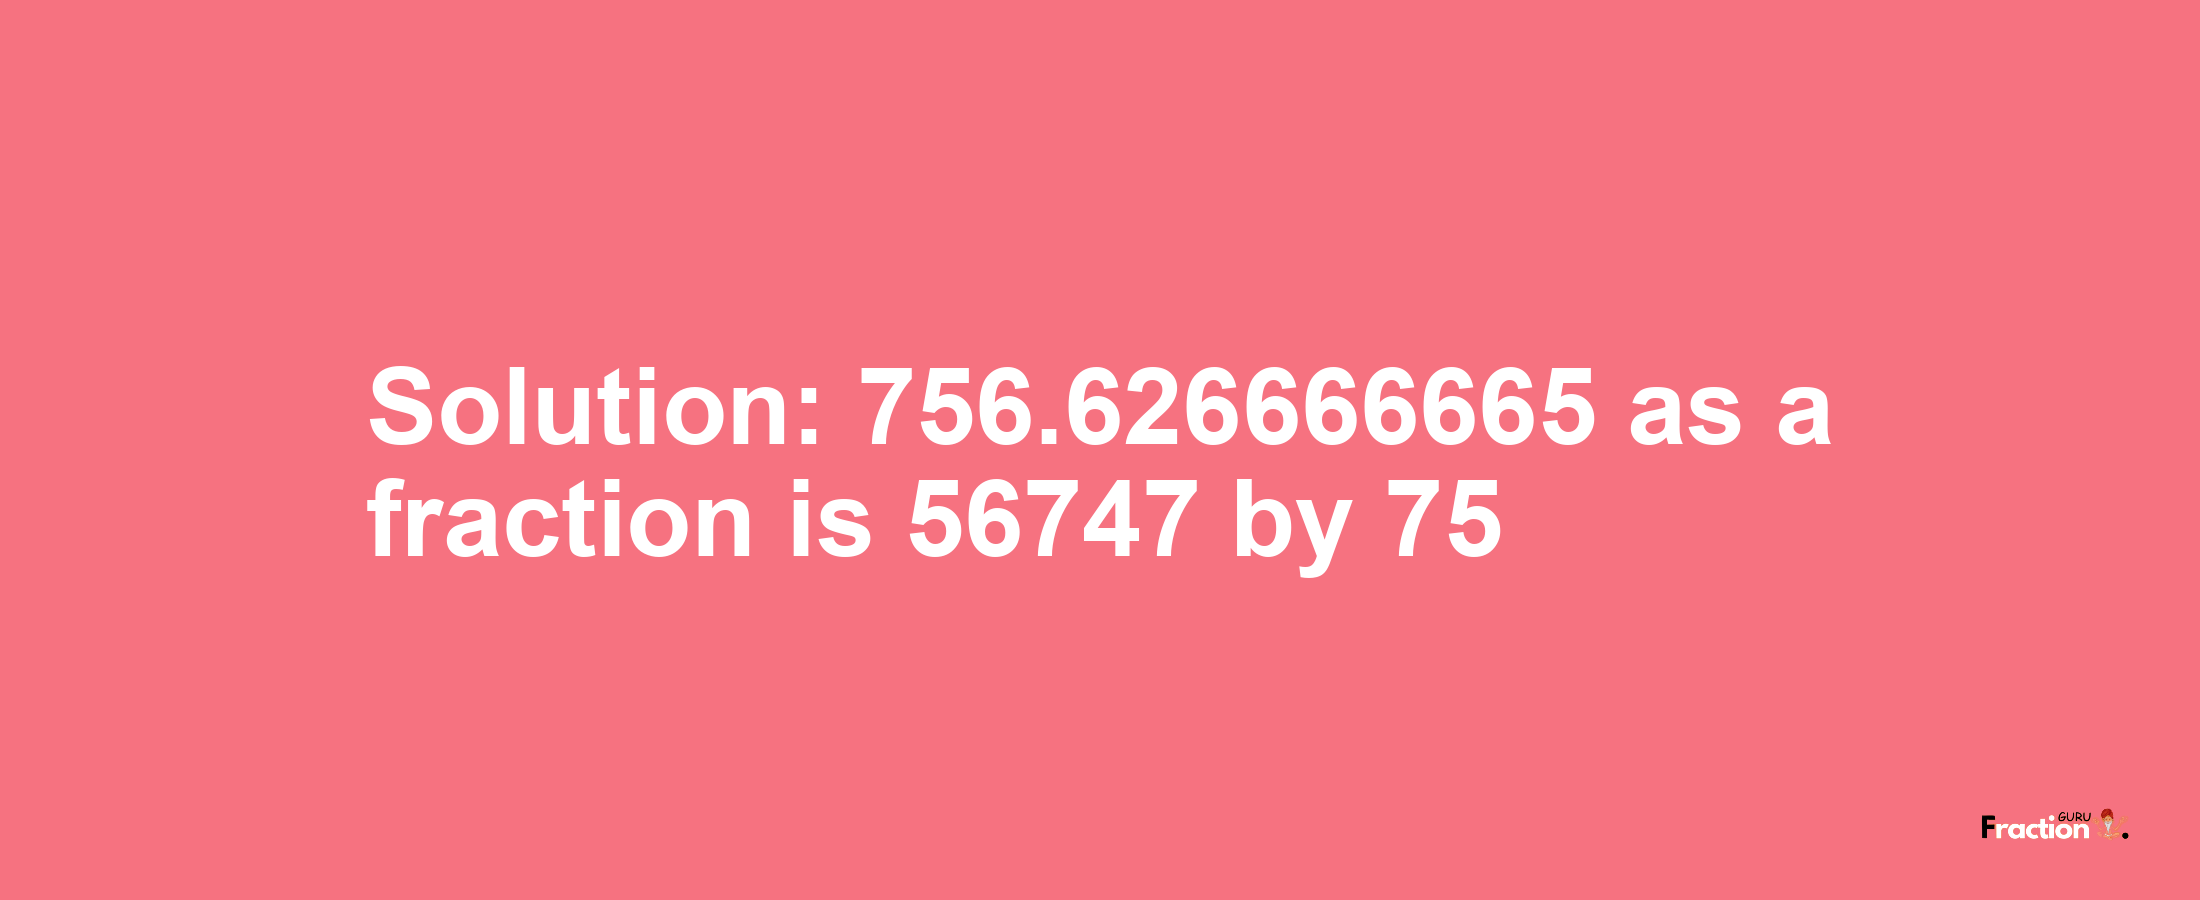 Solution:756.626666665 as a fraction is 56747/75